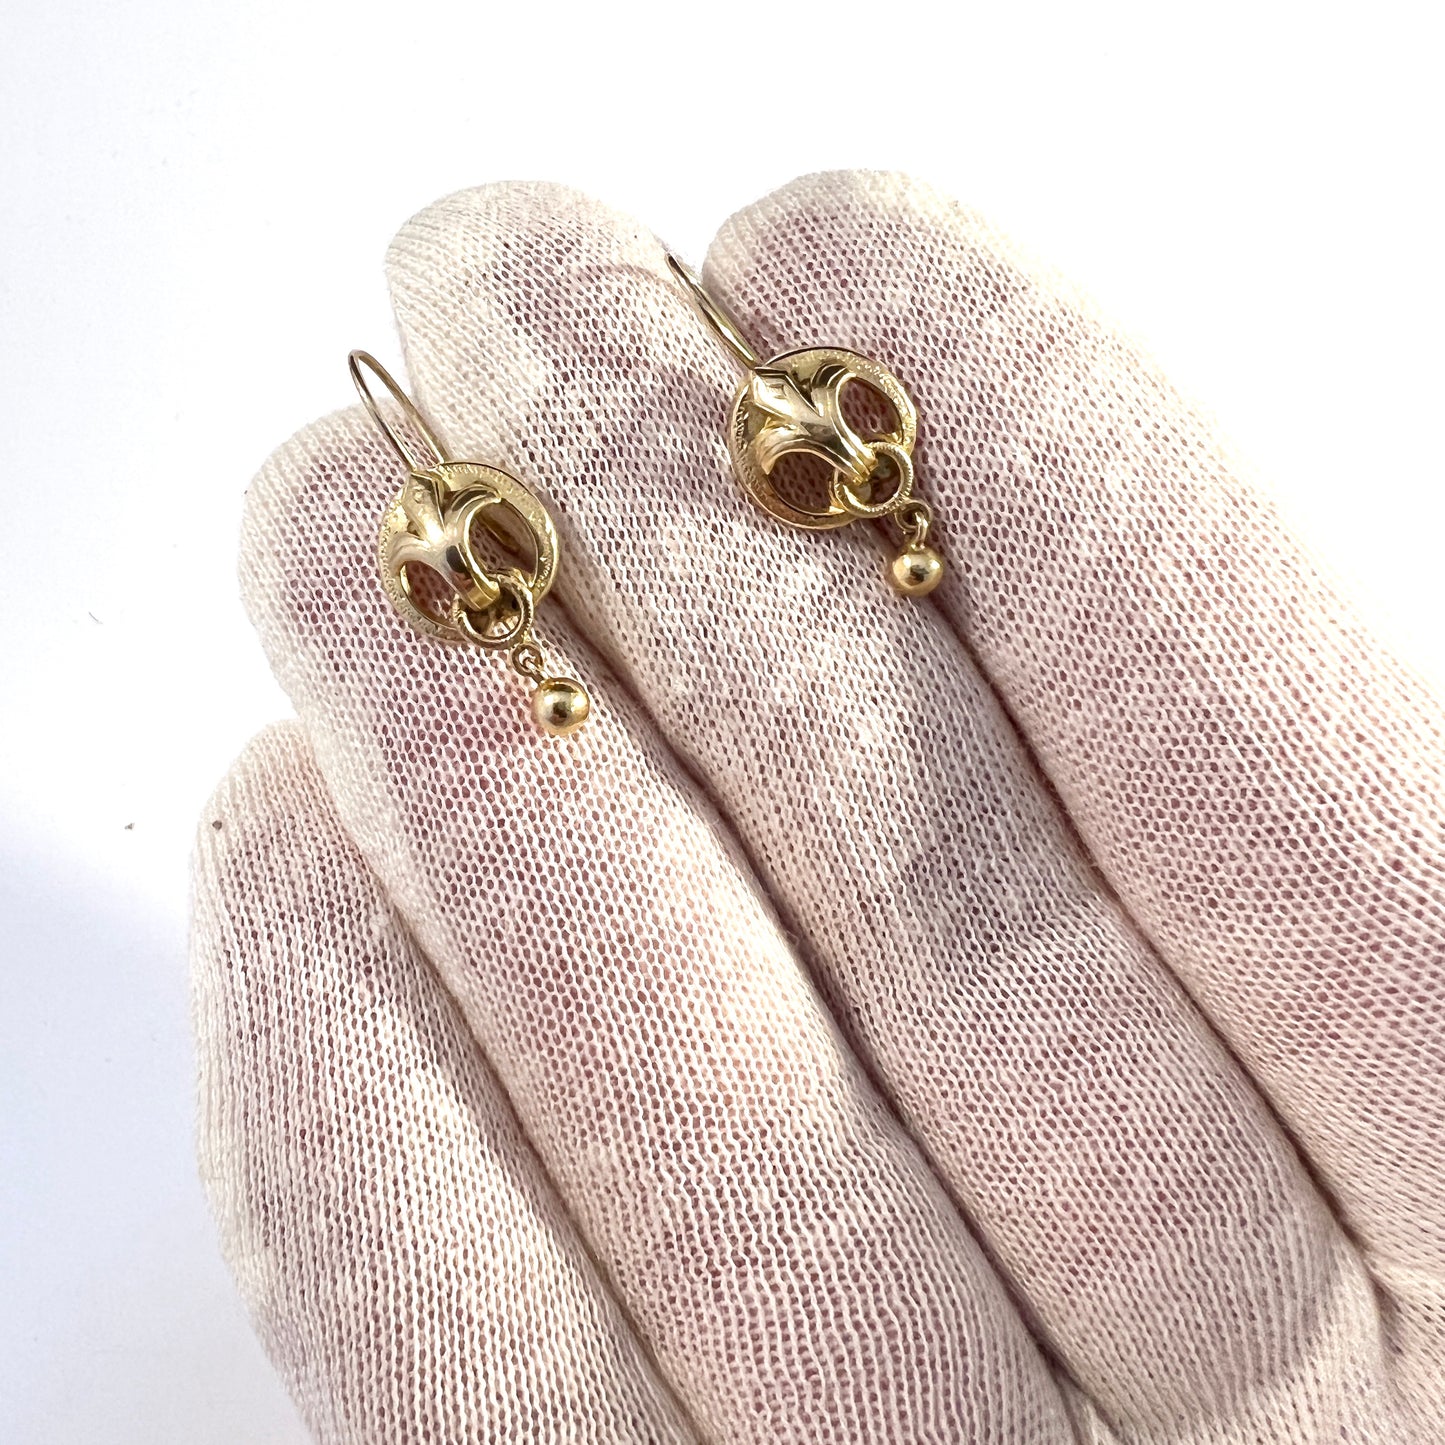 Antique c year 1900. 18k Gold Earrings. Possibly France.